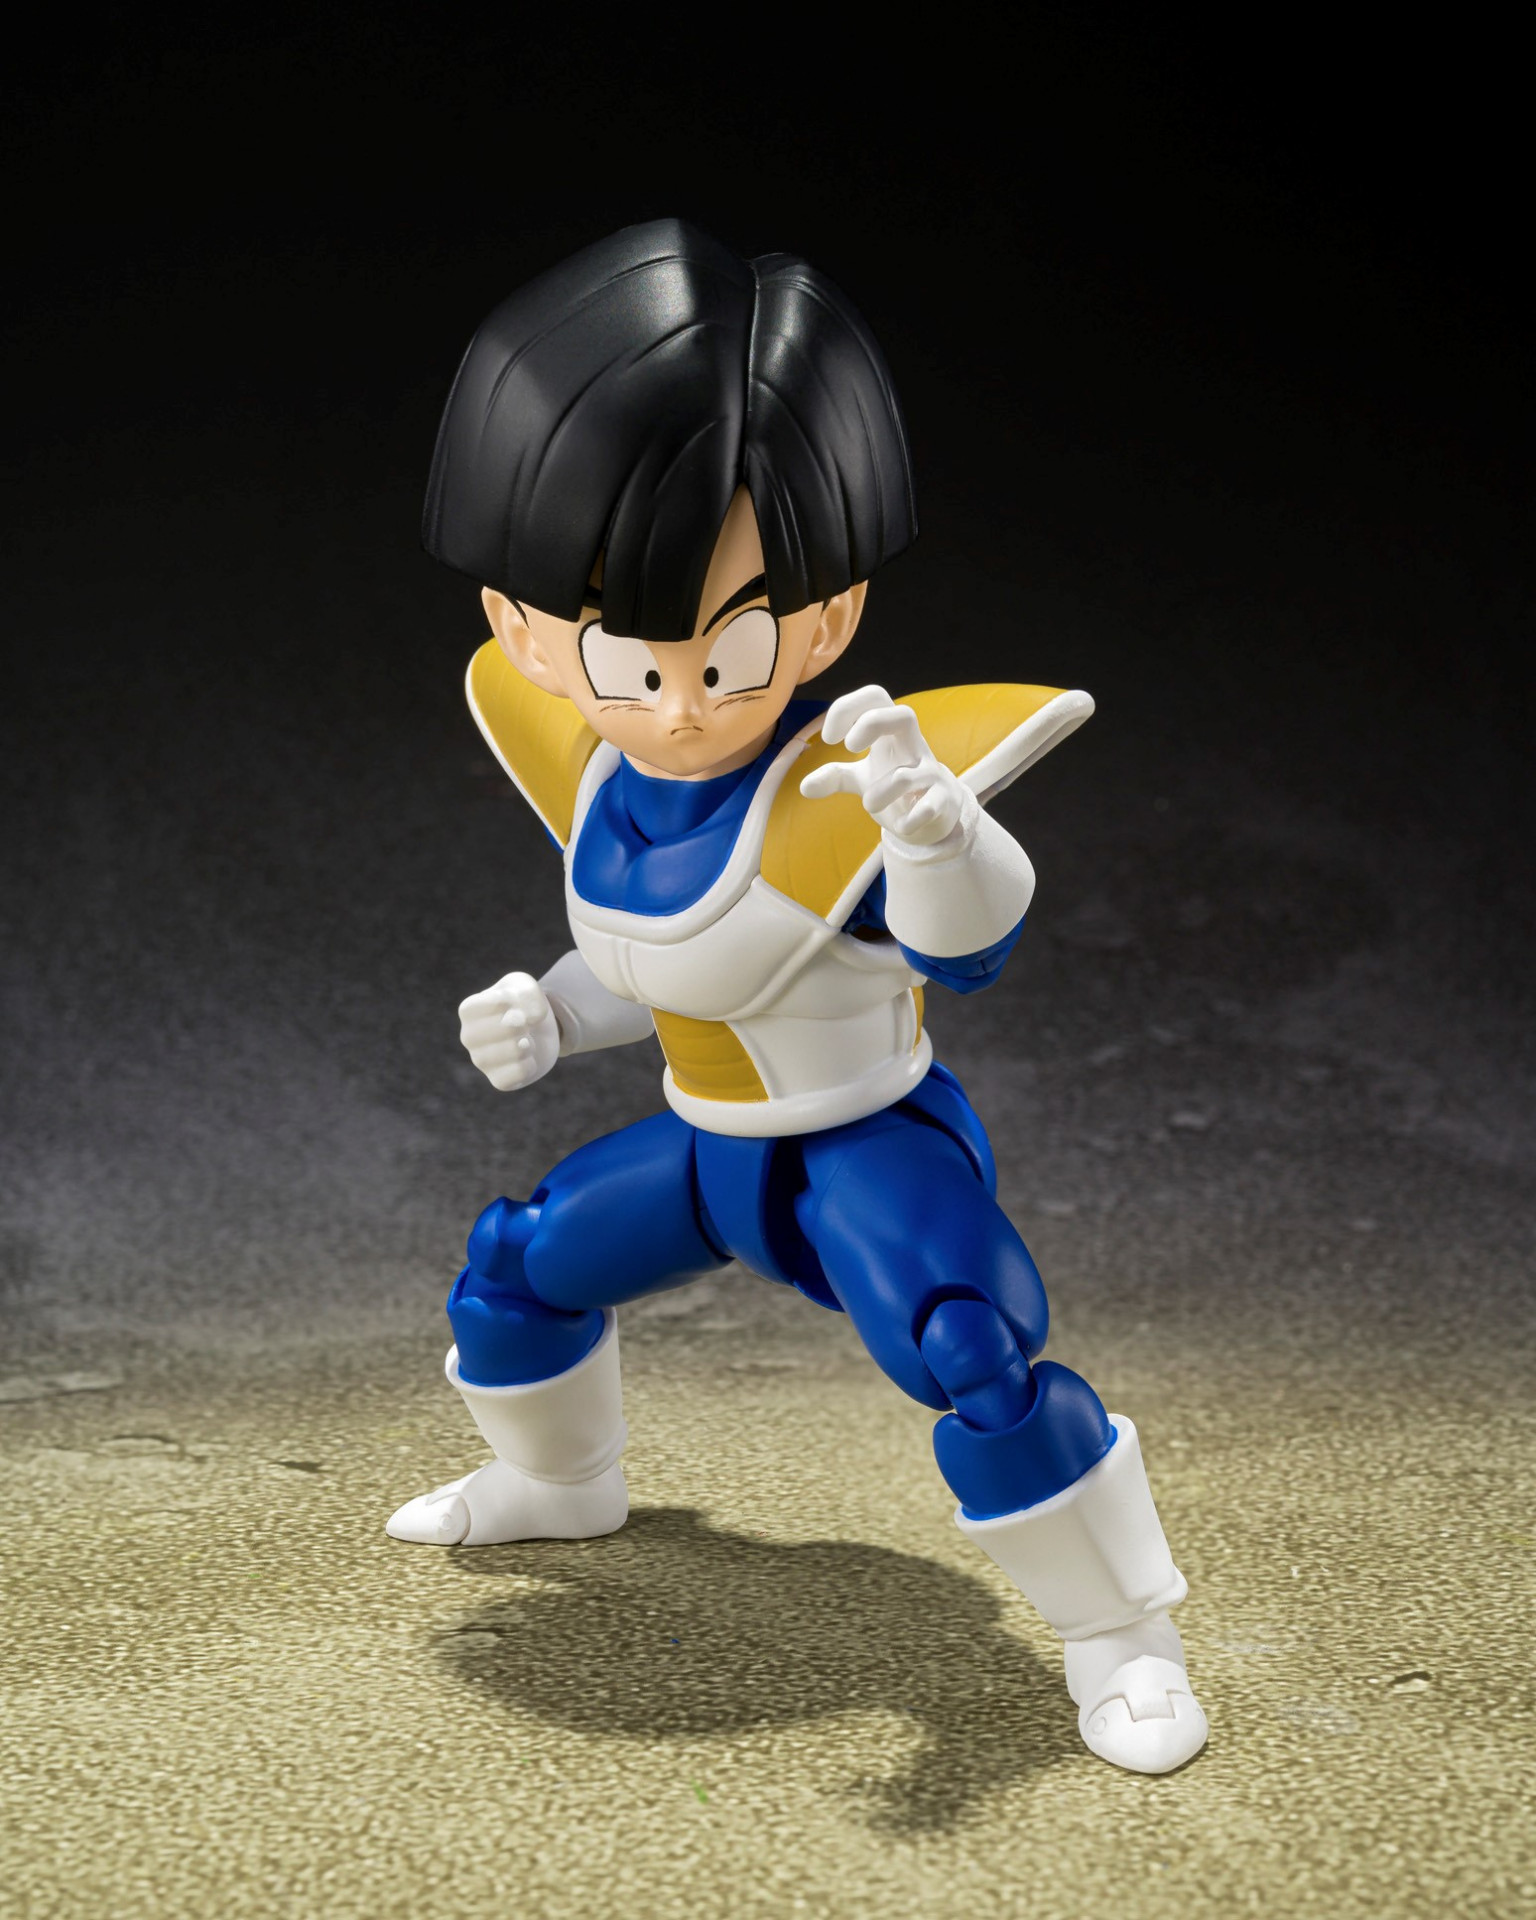 Gohan -Battle Armor- Is Coming to S.H.Figuarts!]